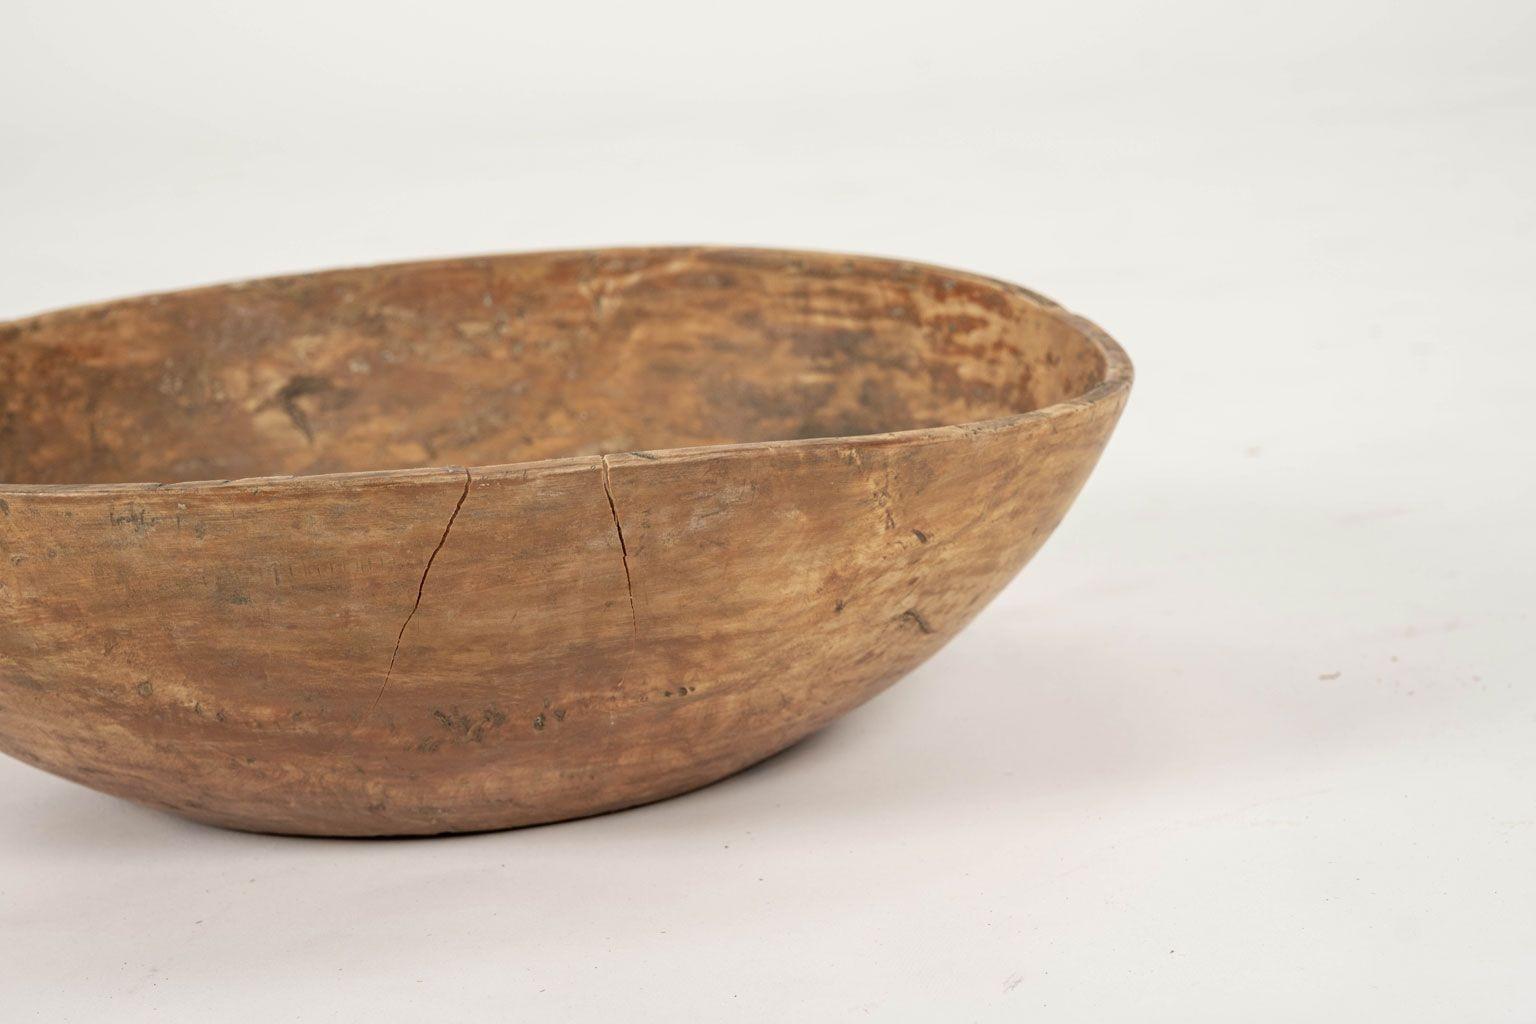 Ocher color rustic Swedish wooden dug out bowl dating to 19th century. Wood plug repair and remnants of early paint.

Note: When shipped, antique wood may shrink and/or split along its grain, and veneer may loosen or peel, due to changes in humidity